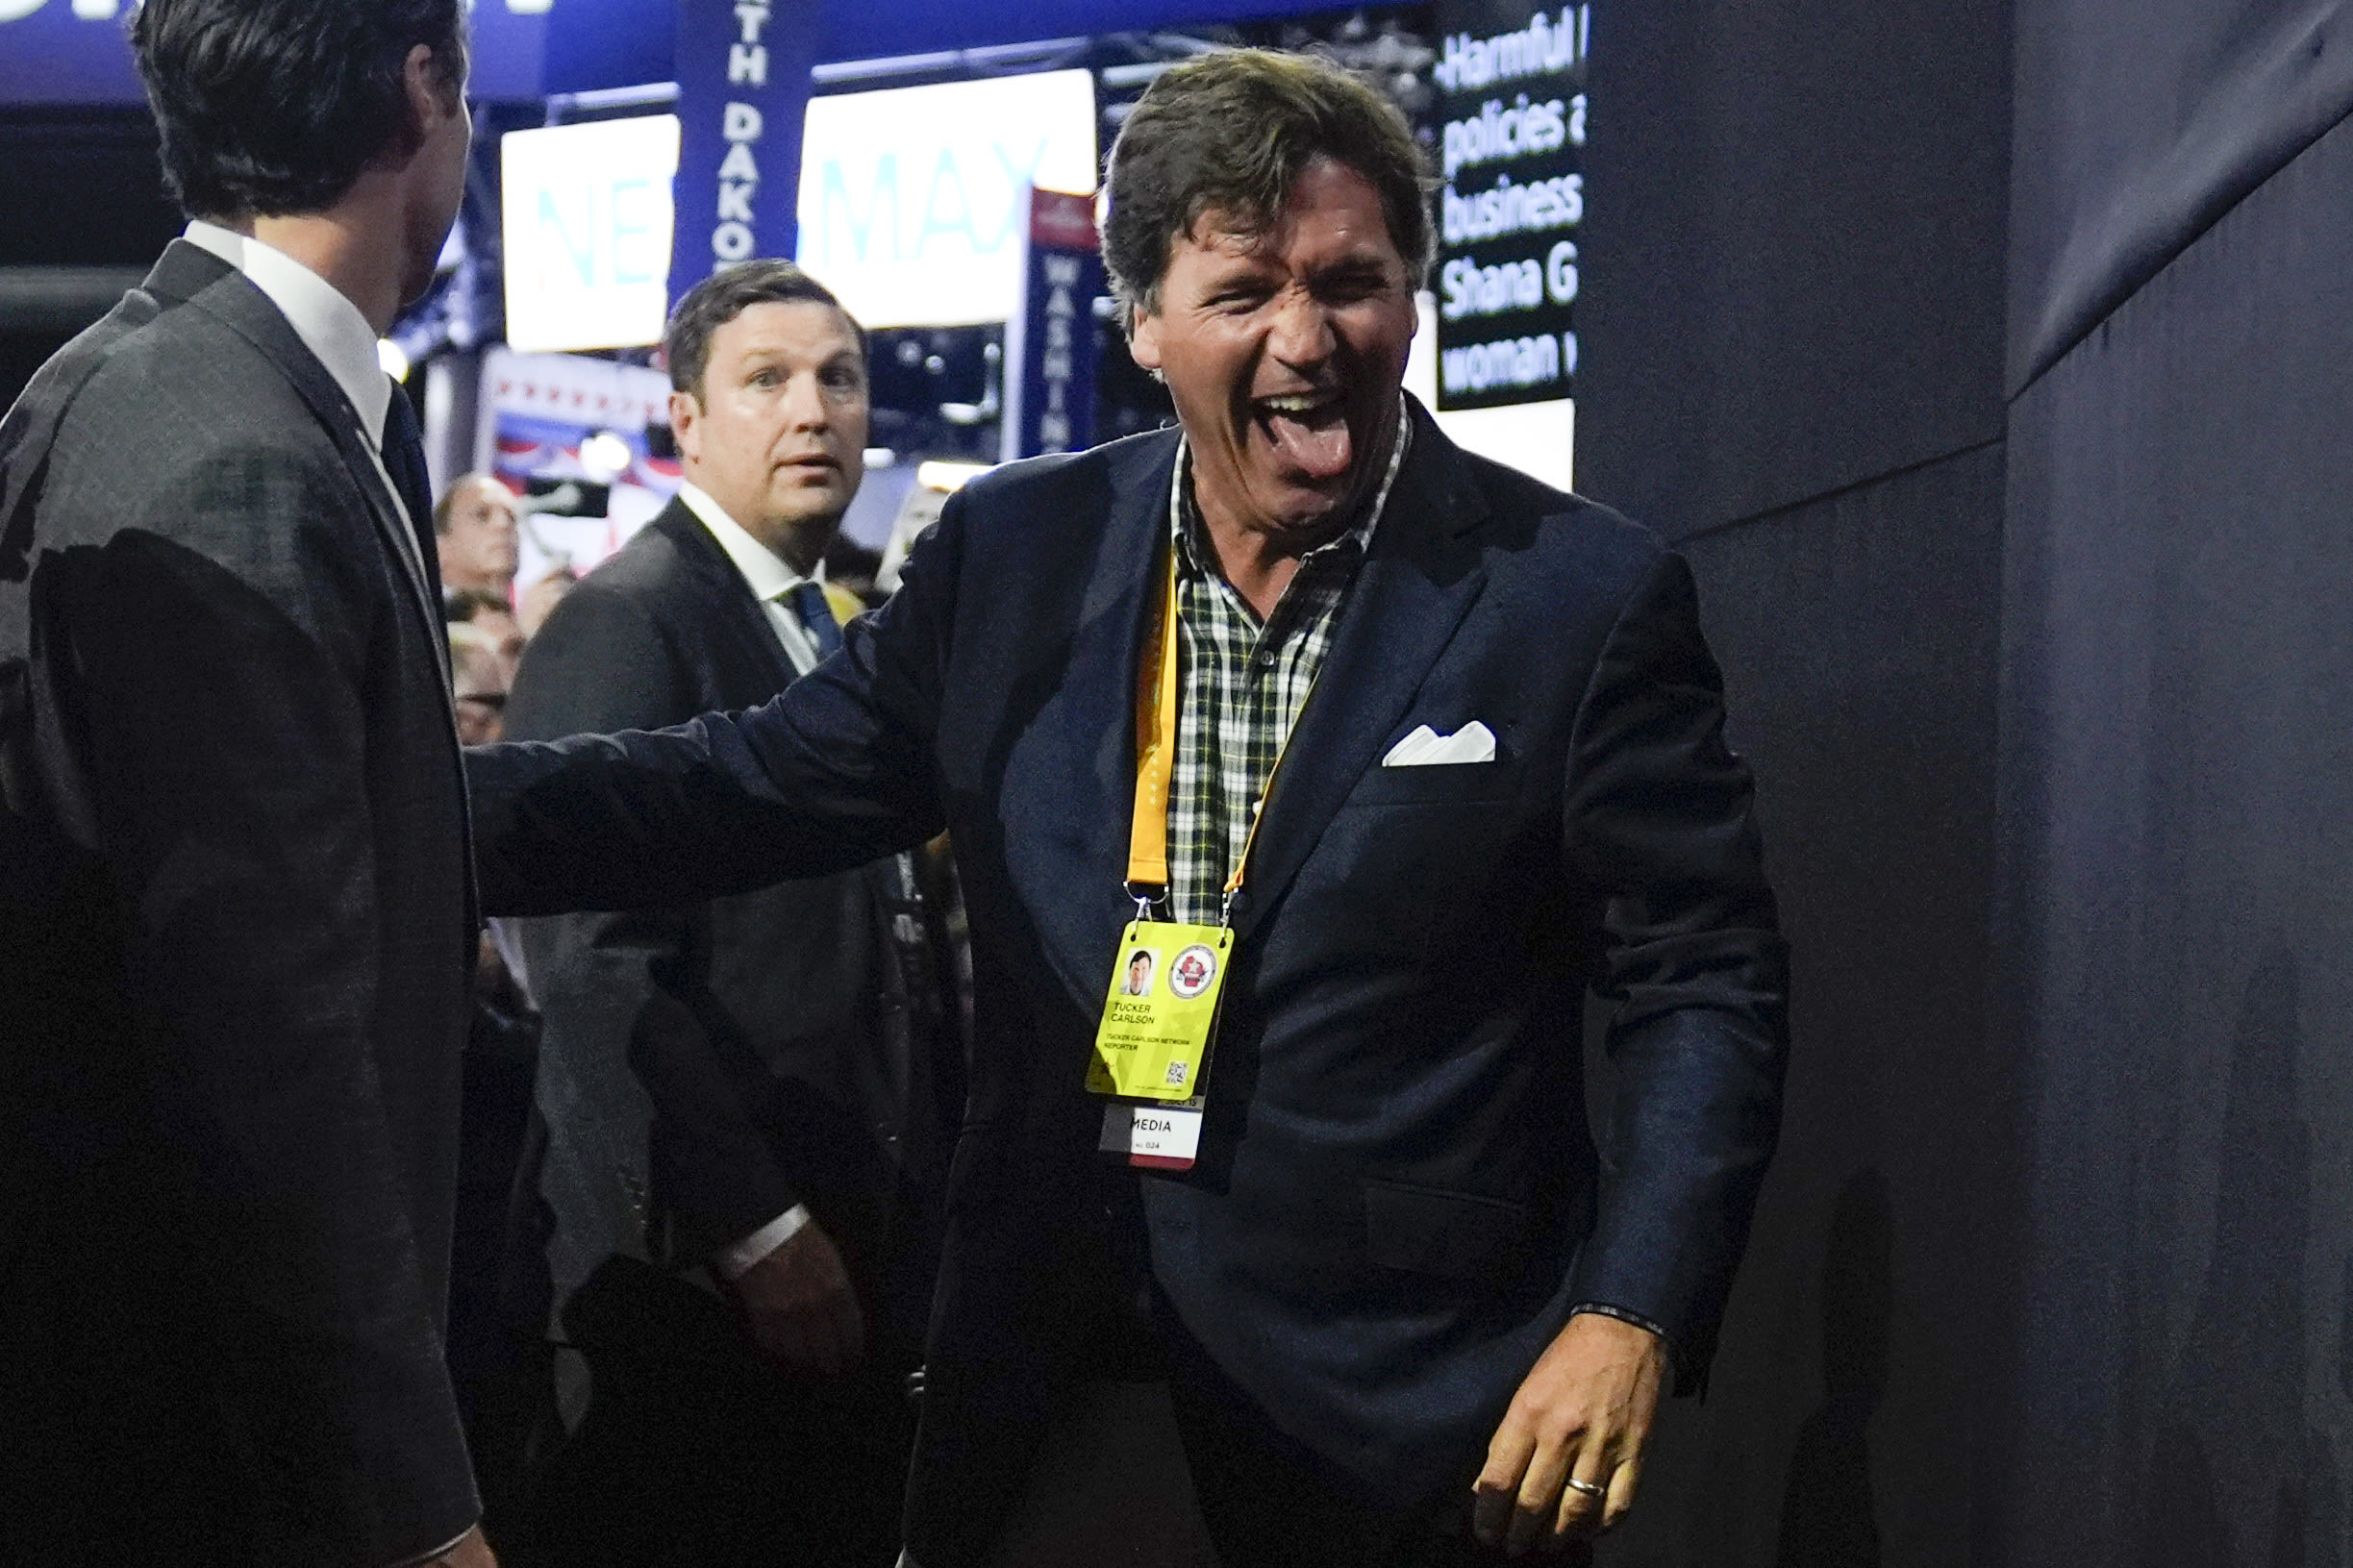 Tucker Carlson seems to be having the time of his life at the RNC